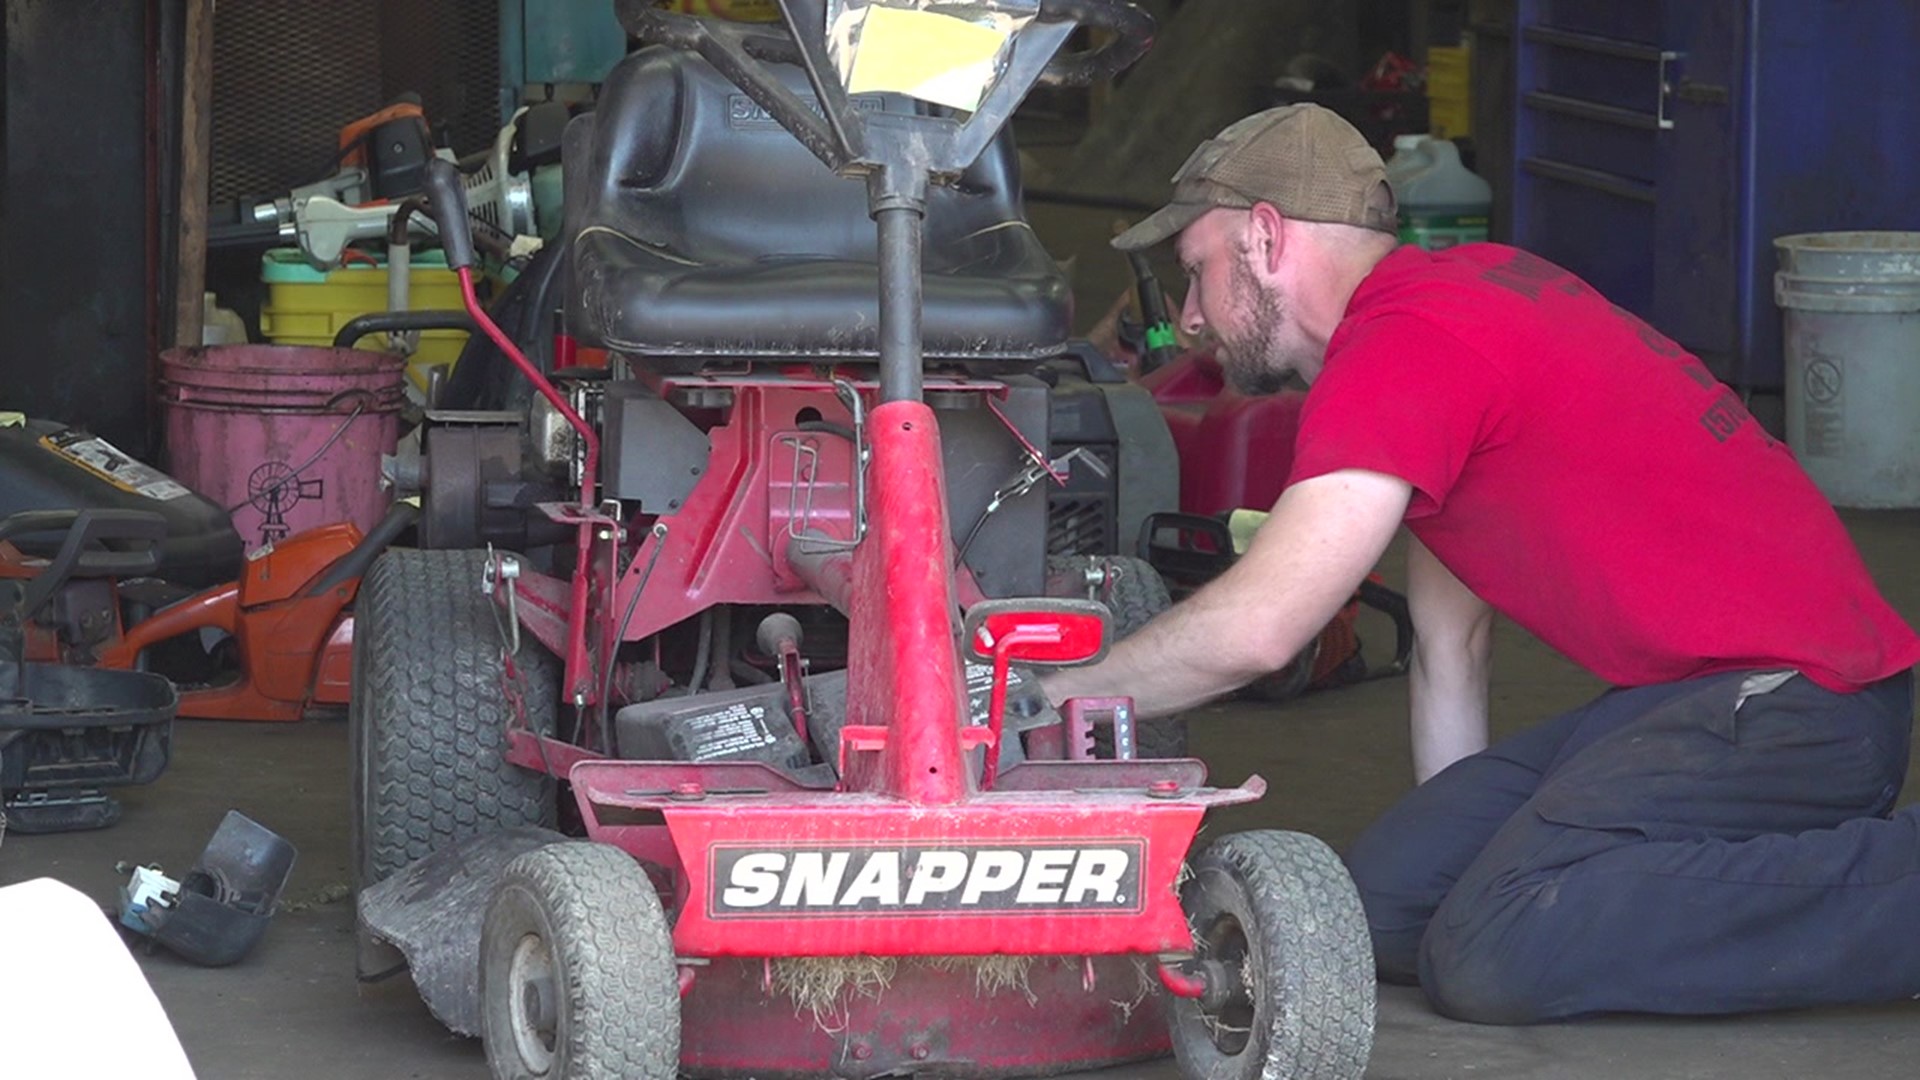 It’s that time of year again to fire up the lawn mowers. For some, that means a trip to the repair shop.